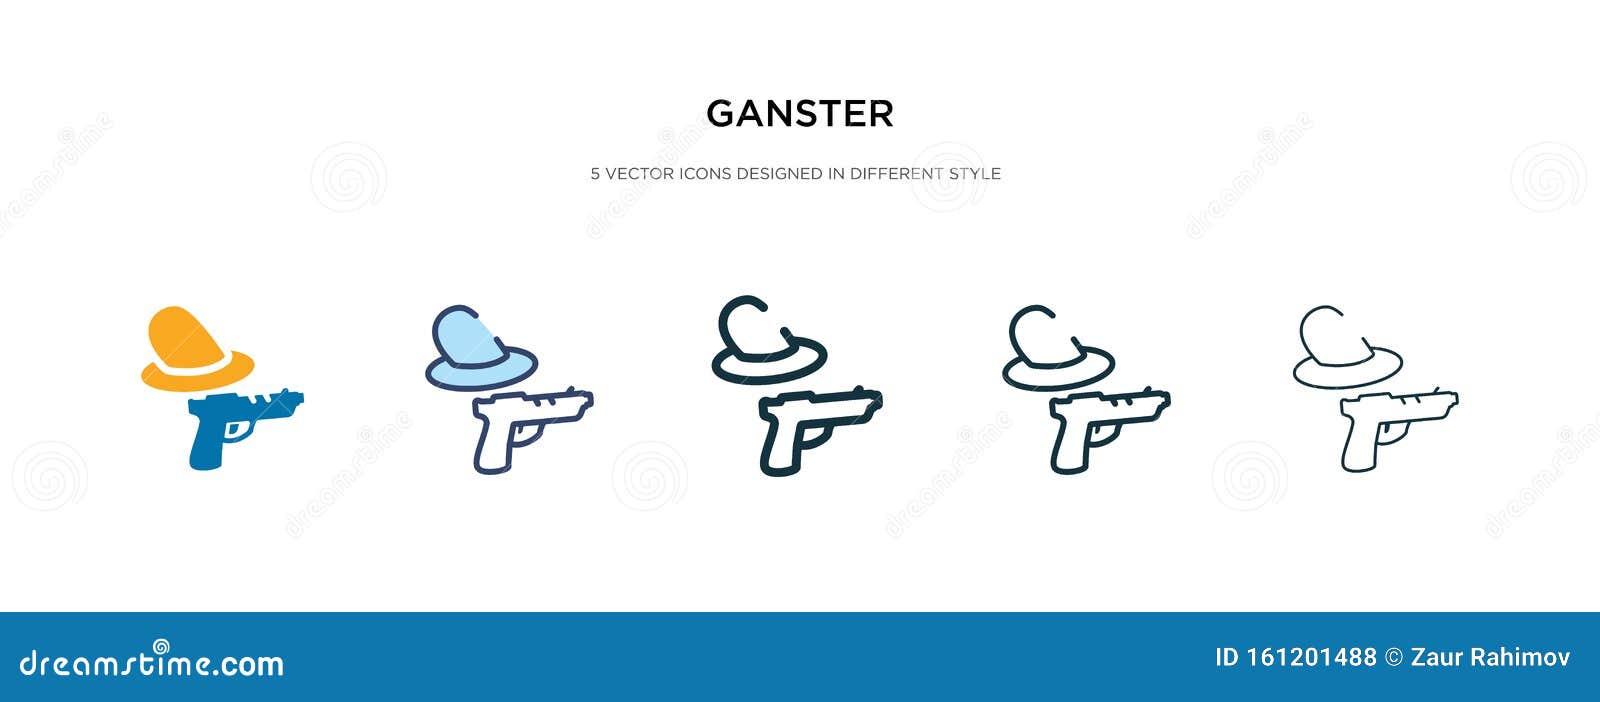 ganster icon in different style  . two colored and black ganster  icons ed in filled, outline, line